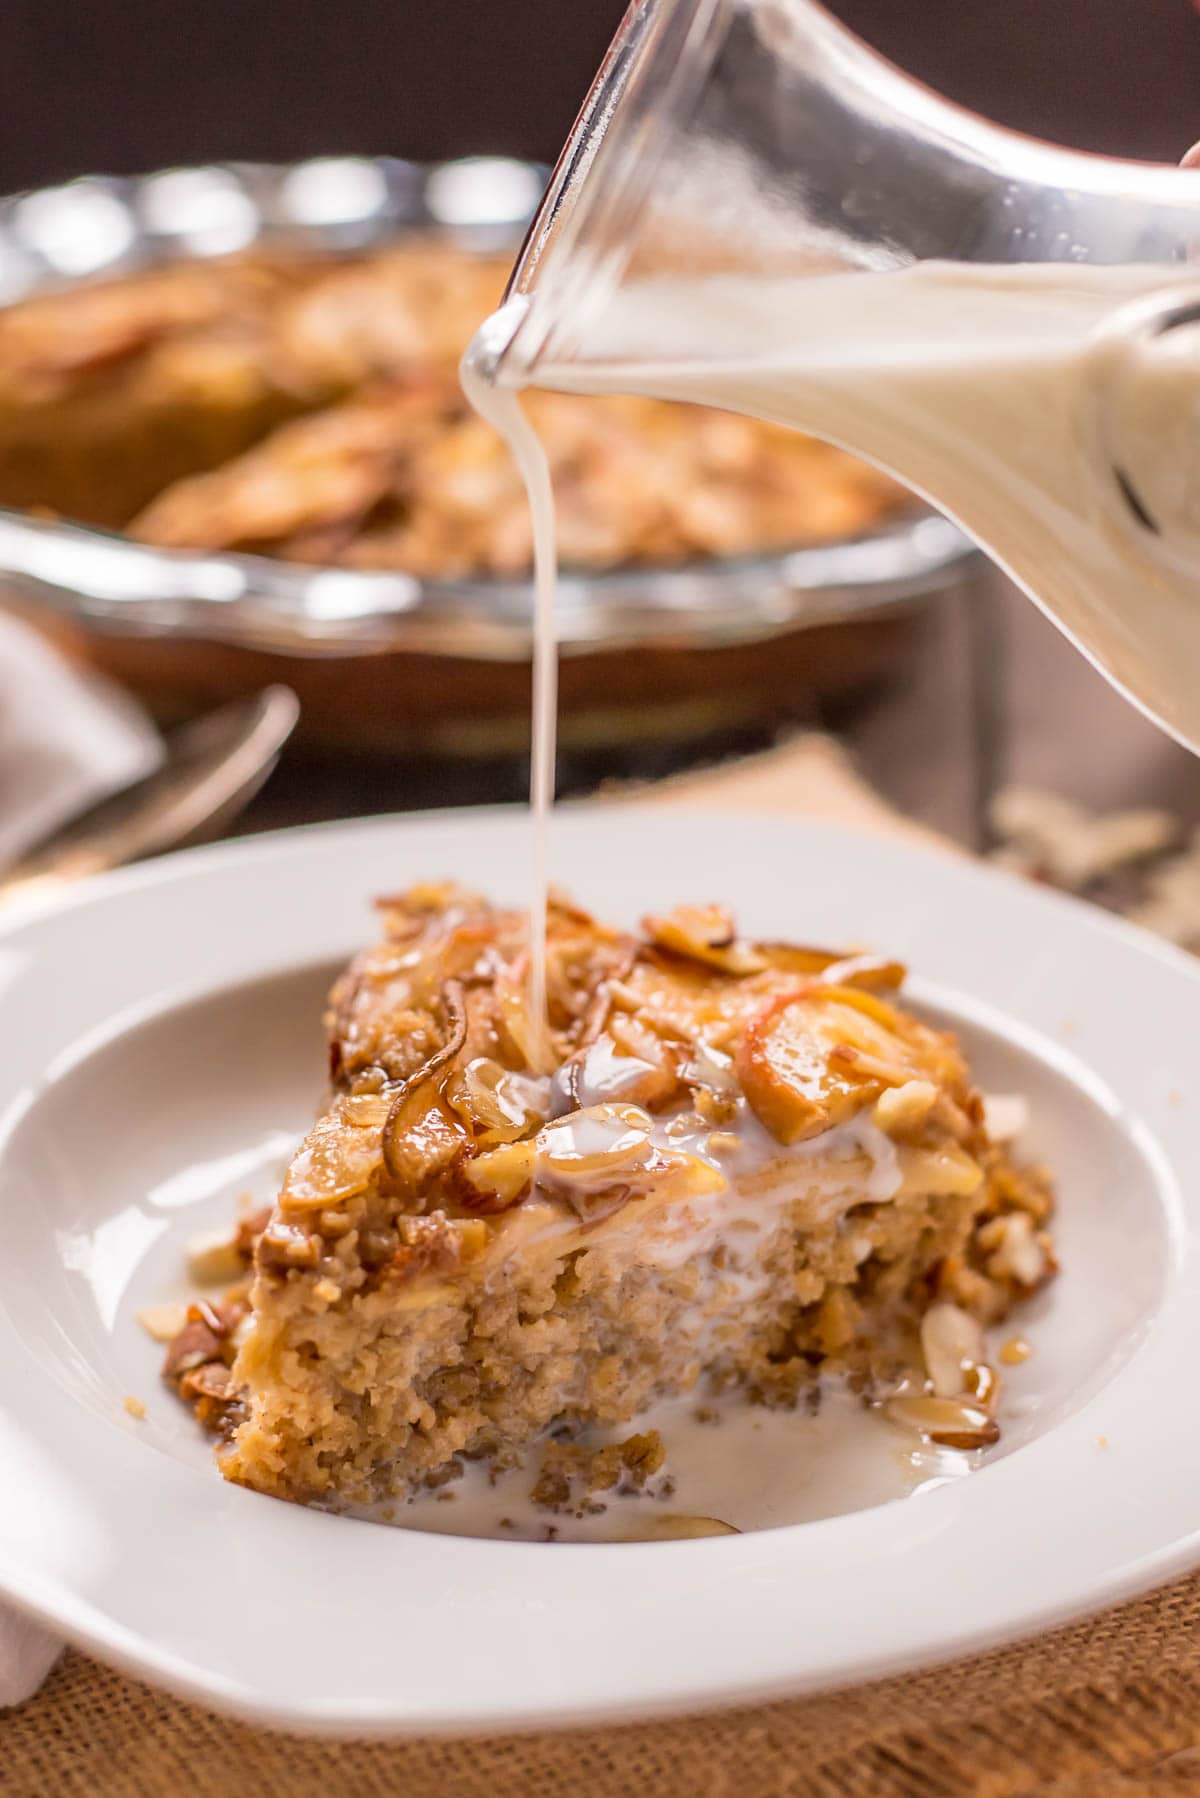 Apple, pears, and almond slices top this easy, Amish Baked Oatmeal.